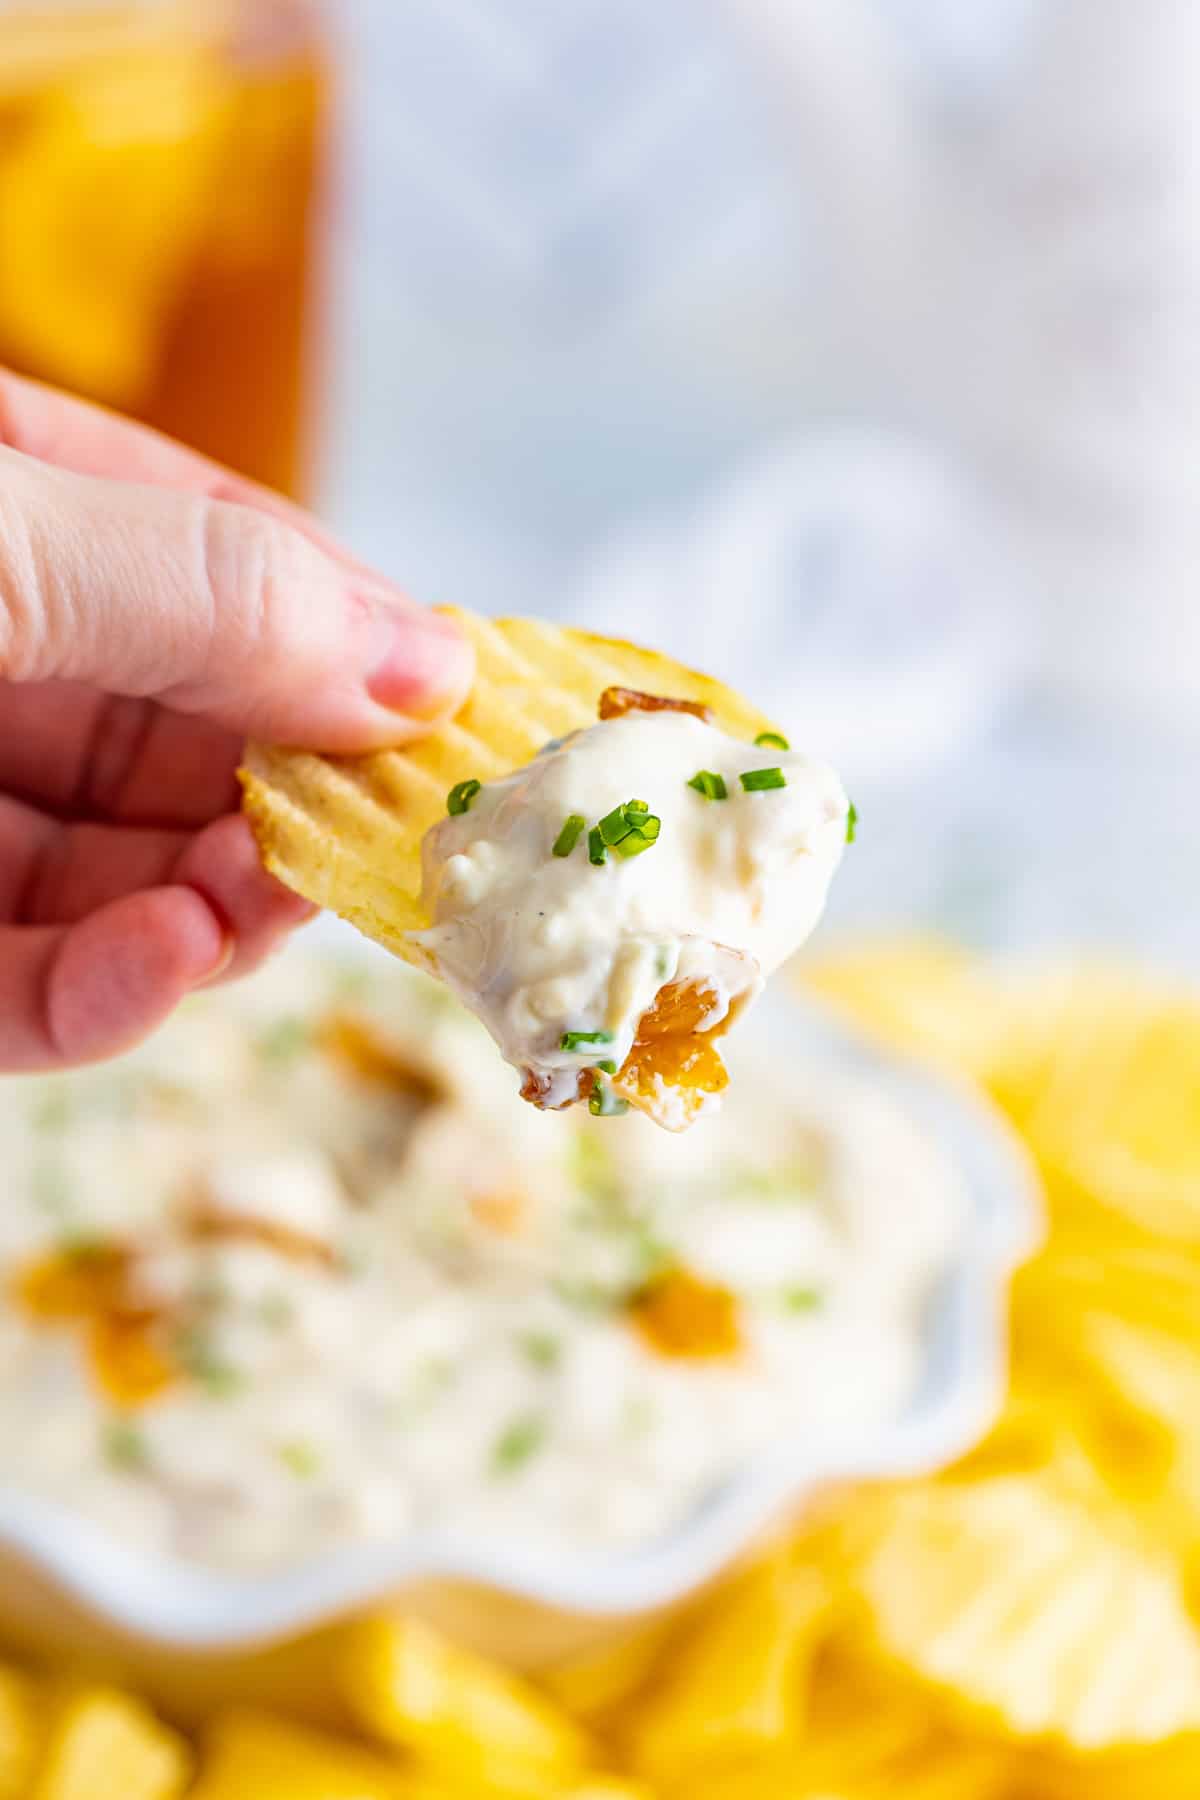 Hand holding chip dipped in creamy french caramelized onion dip.